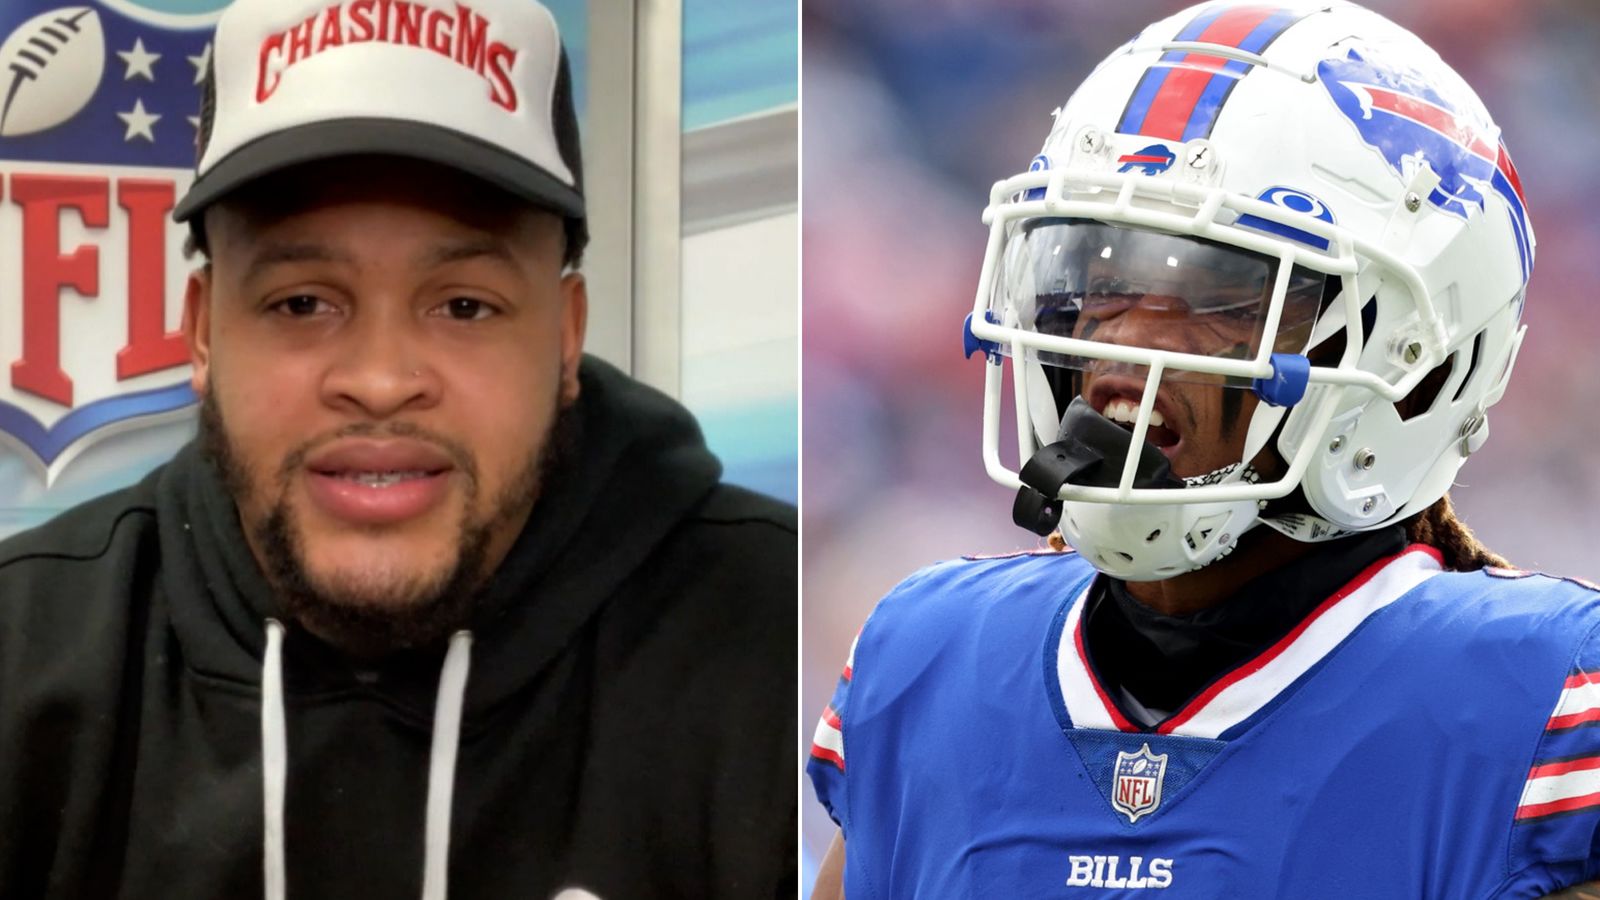 Dion Dawkins: Buffalo Bills player describes moment he realized 'something  is really, really wrong' after Damar Hamlin's collapse